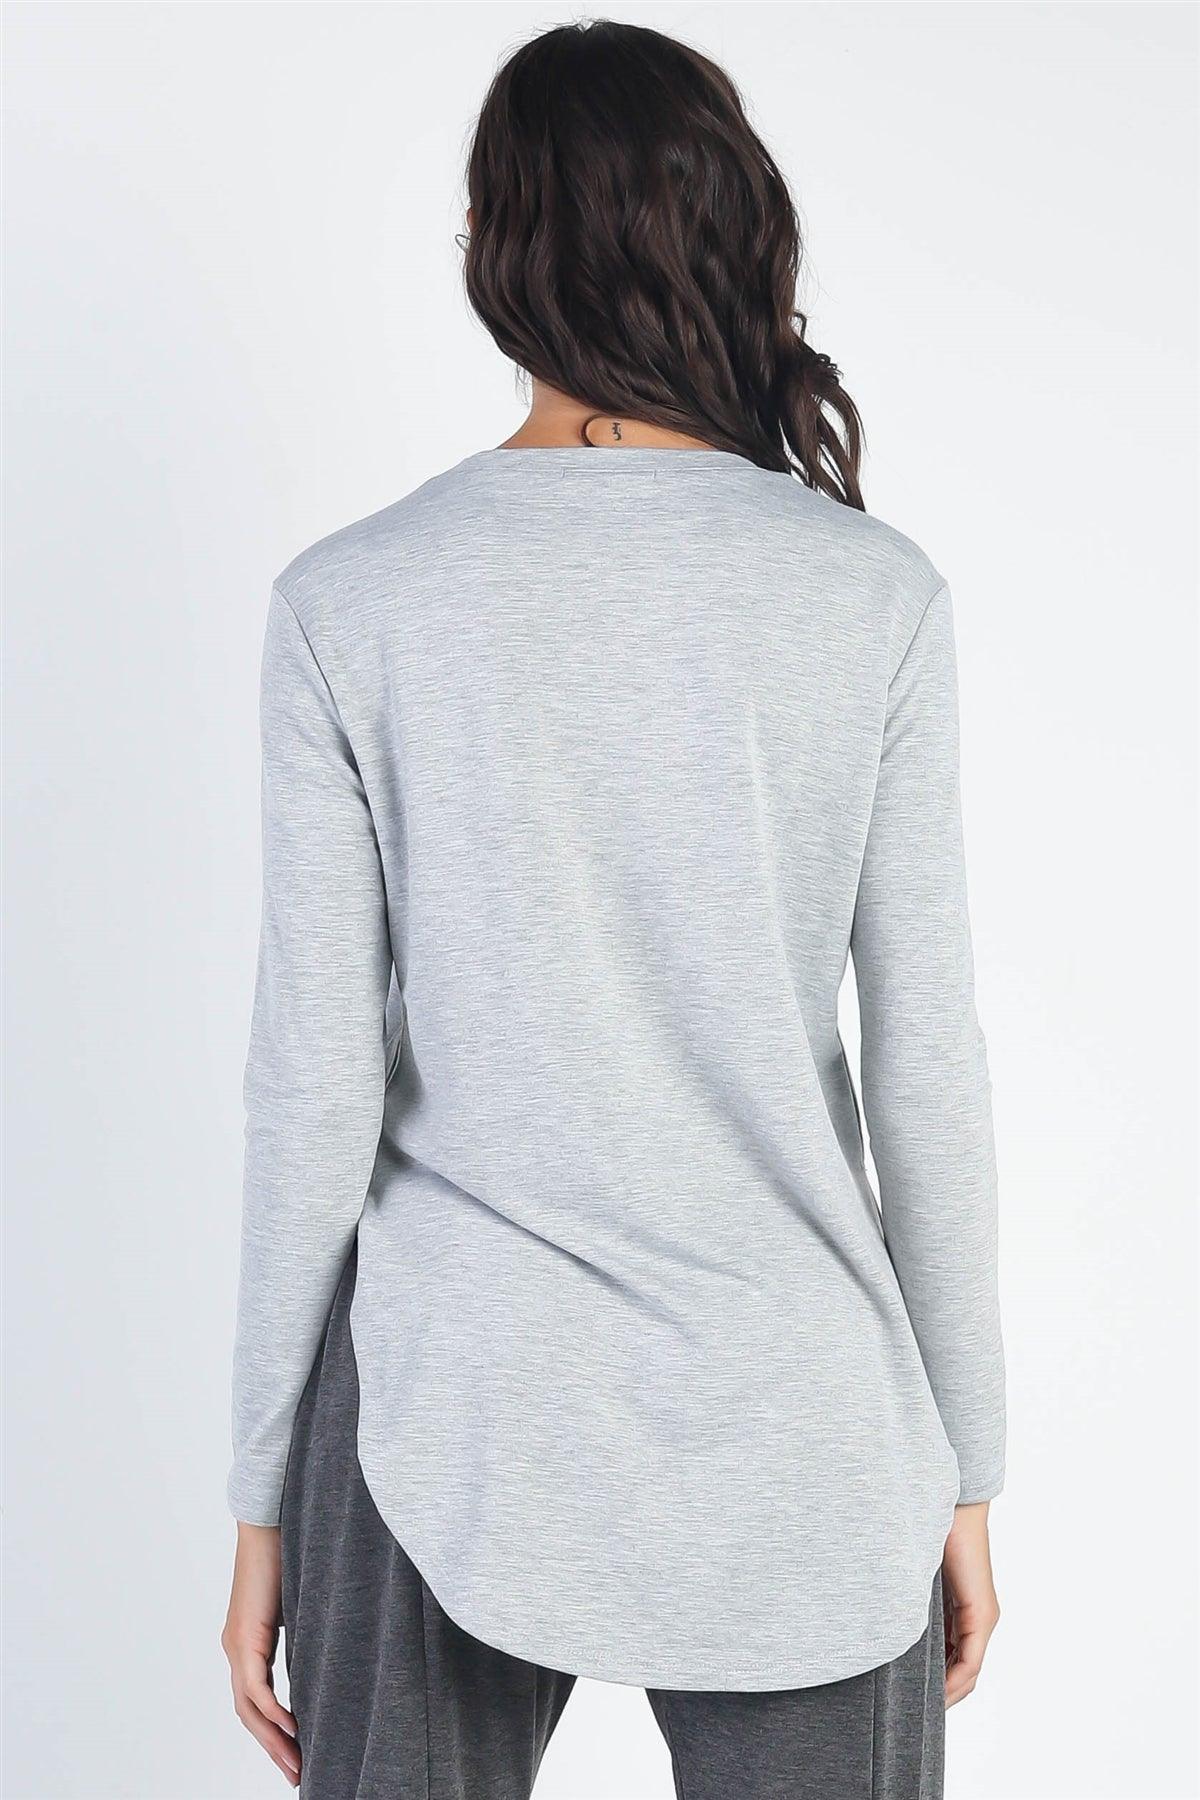 Heather Grey Long Sleeve Relaxed Fit Top /2-2-2